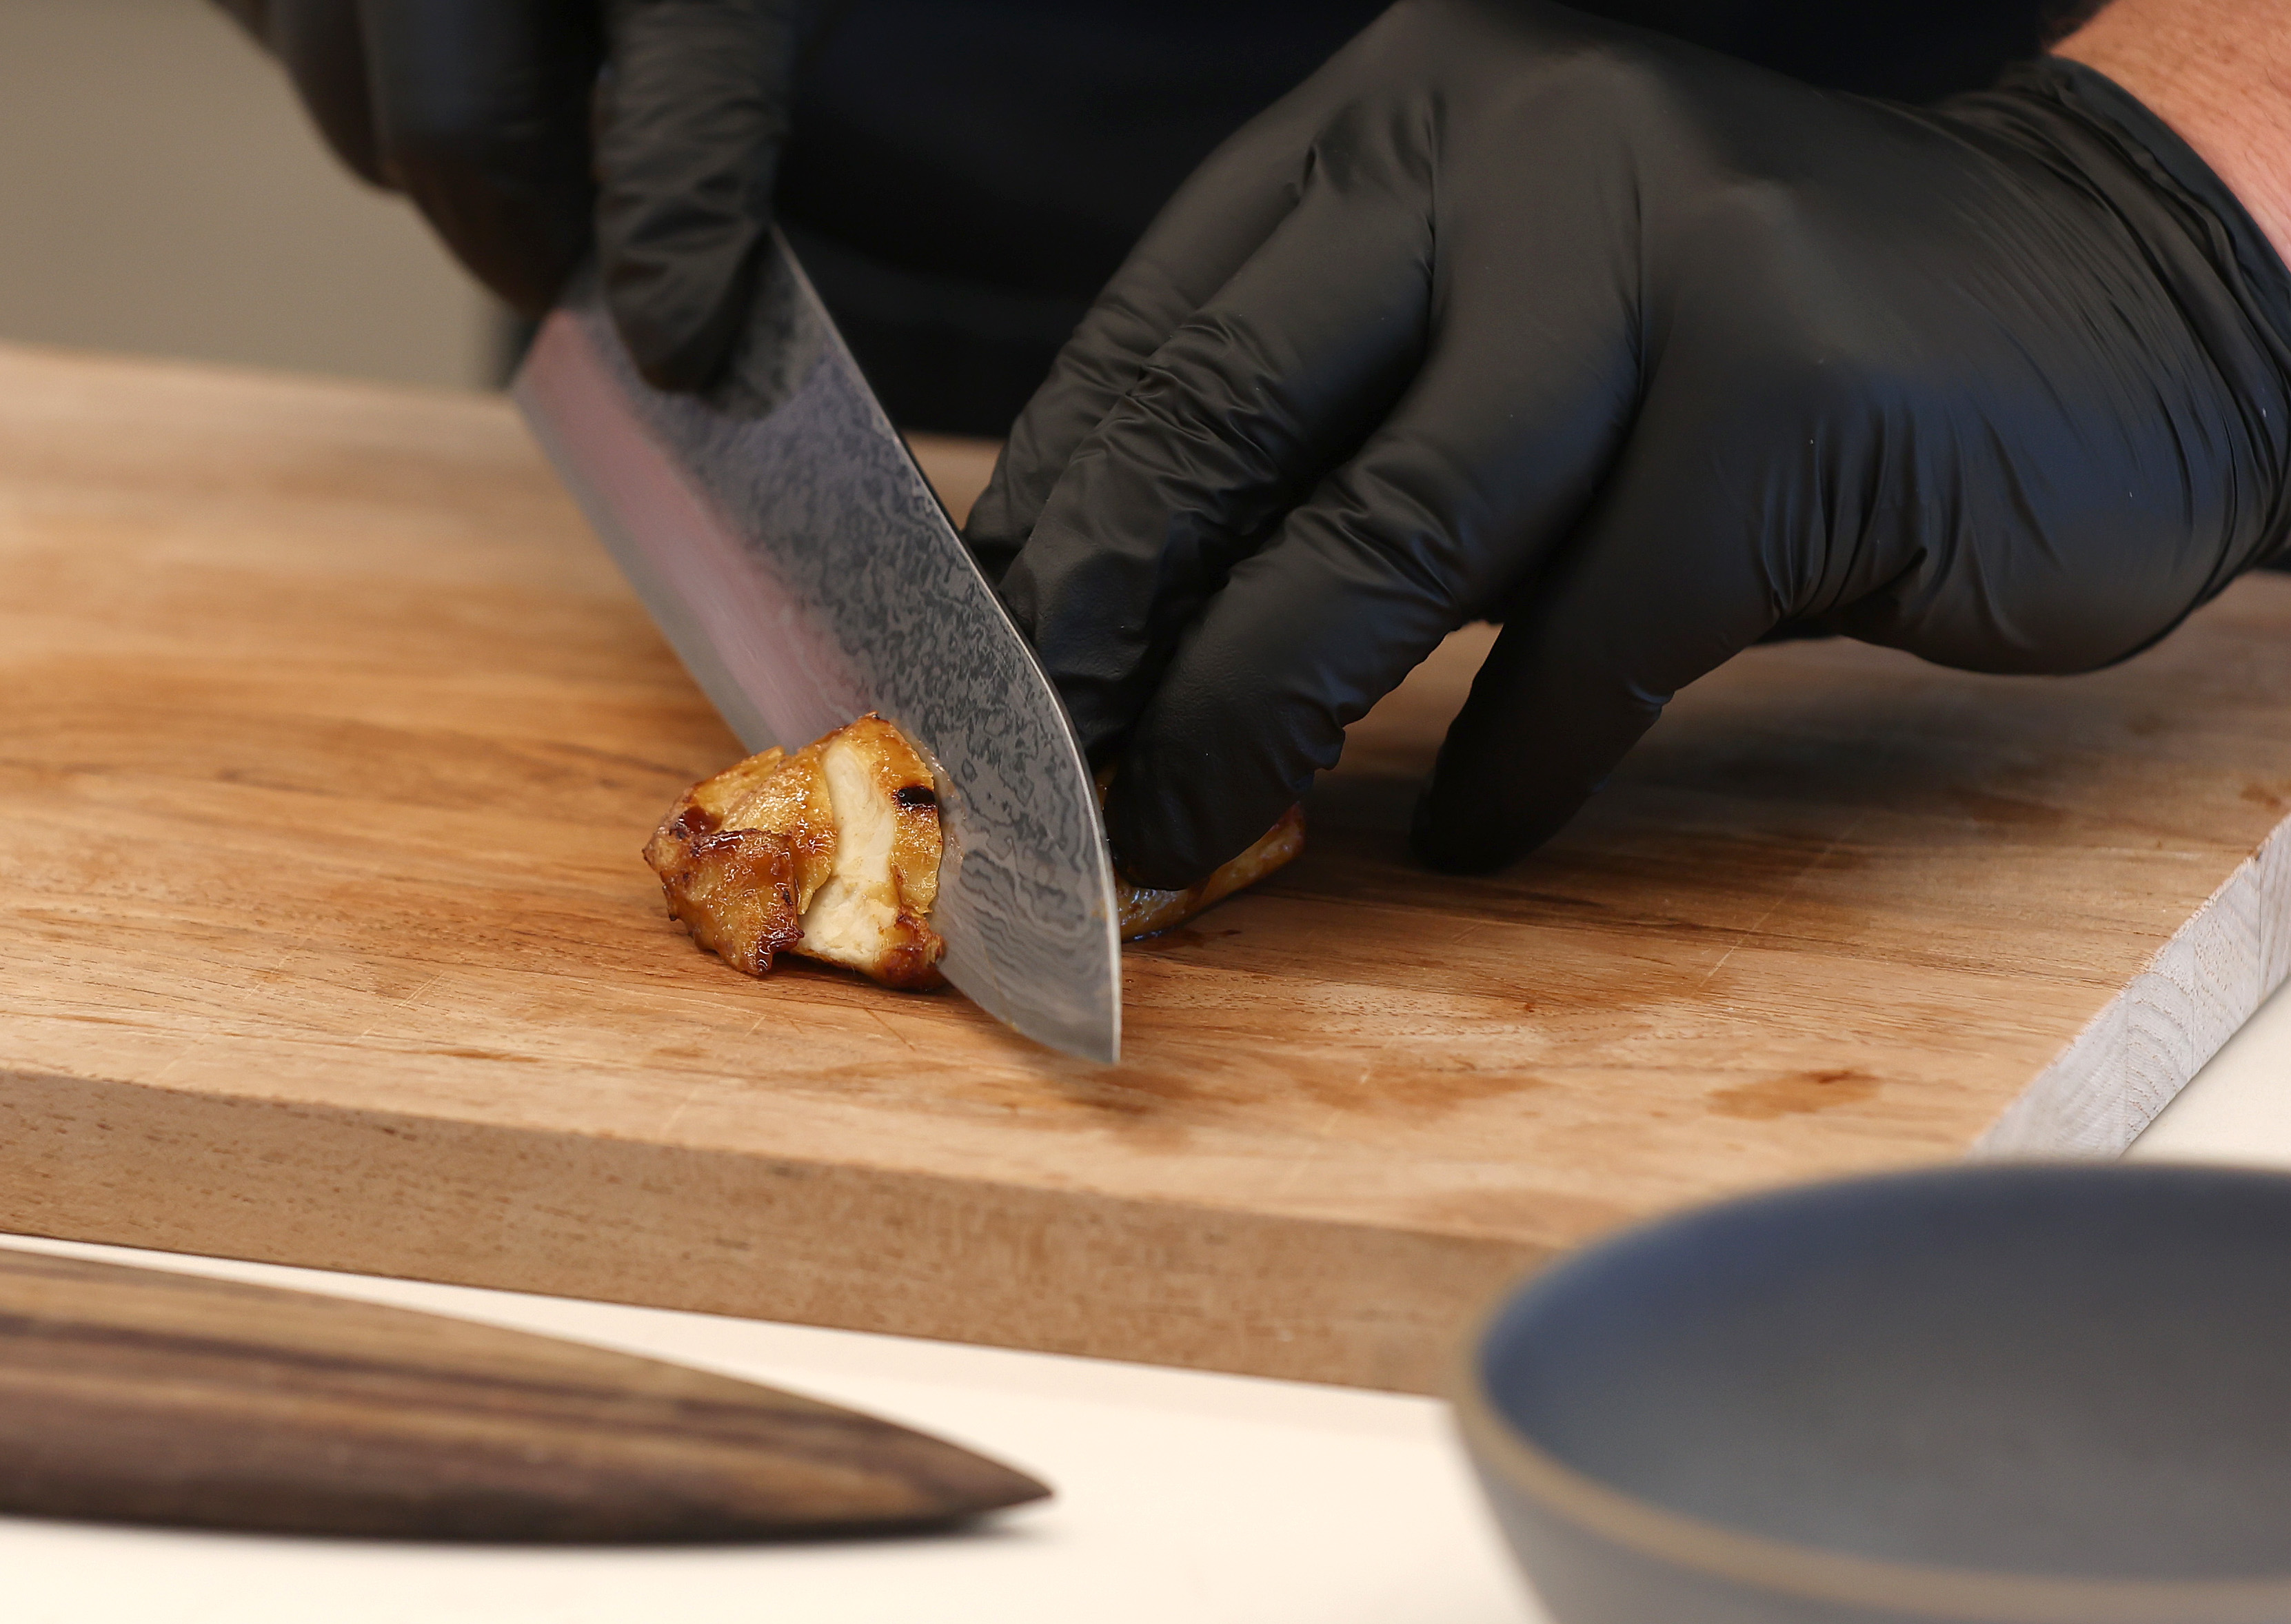 Hands in black plastic gloves use a chef’s knife to cut a piece of cooked chicken on a board.